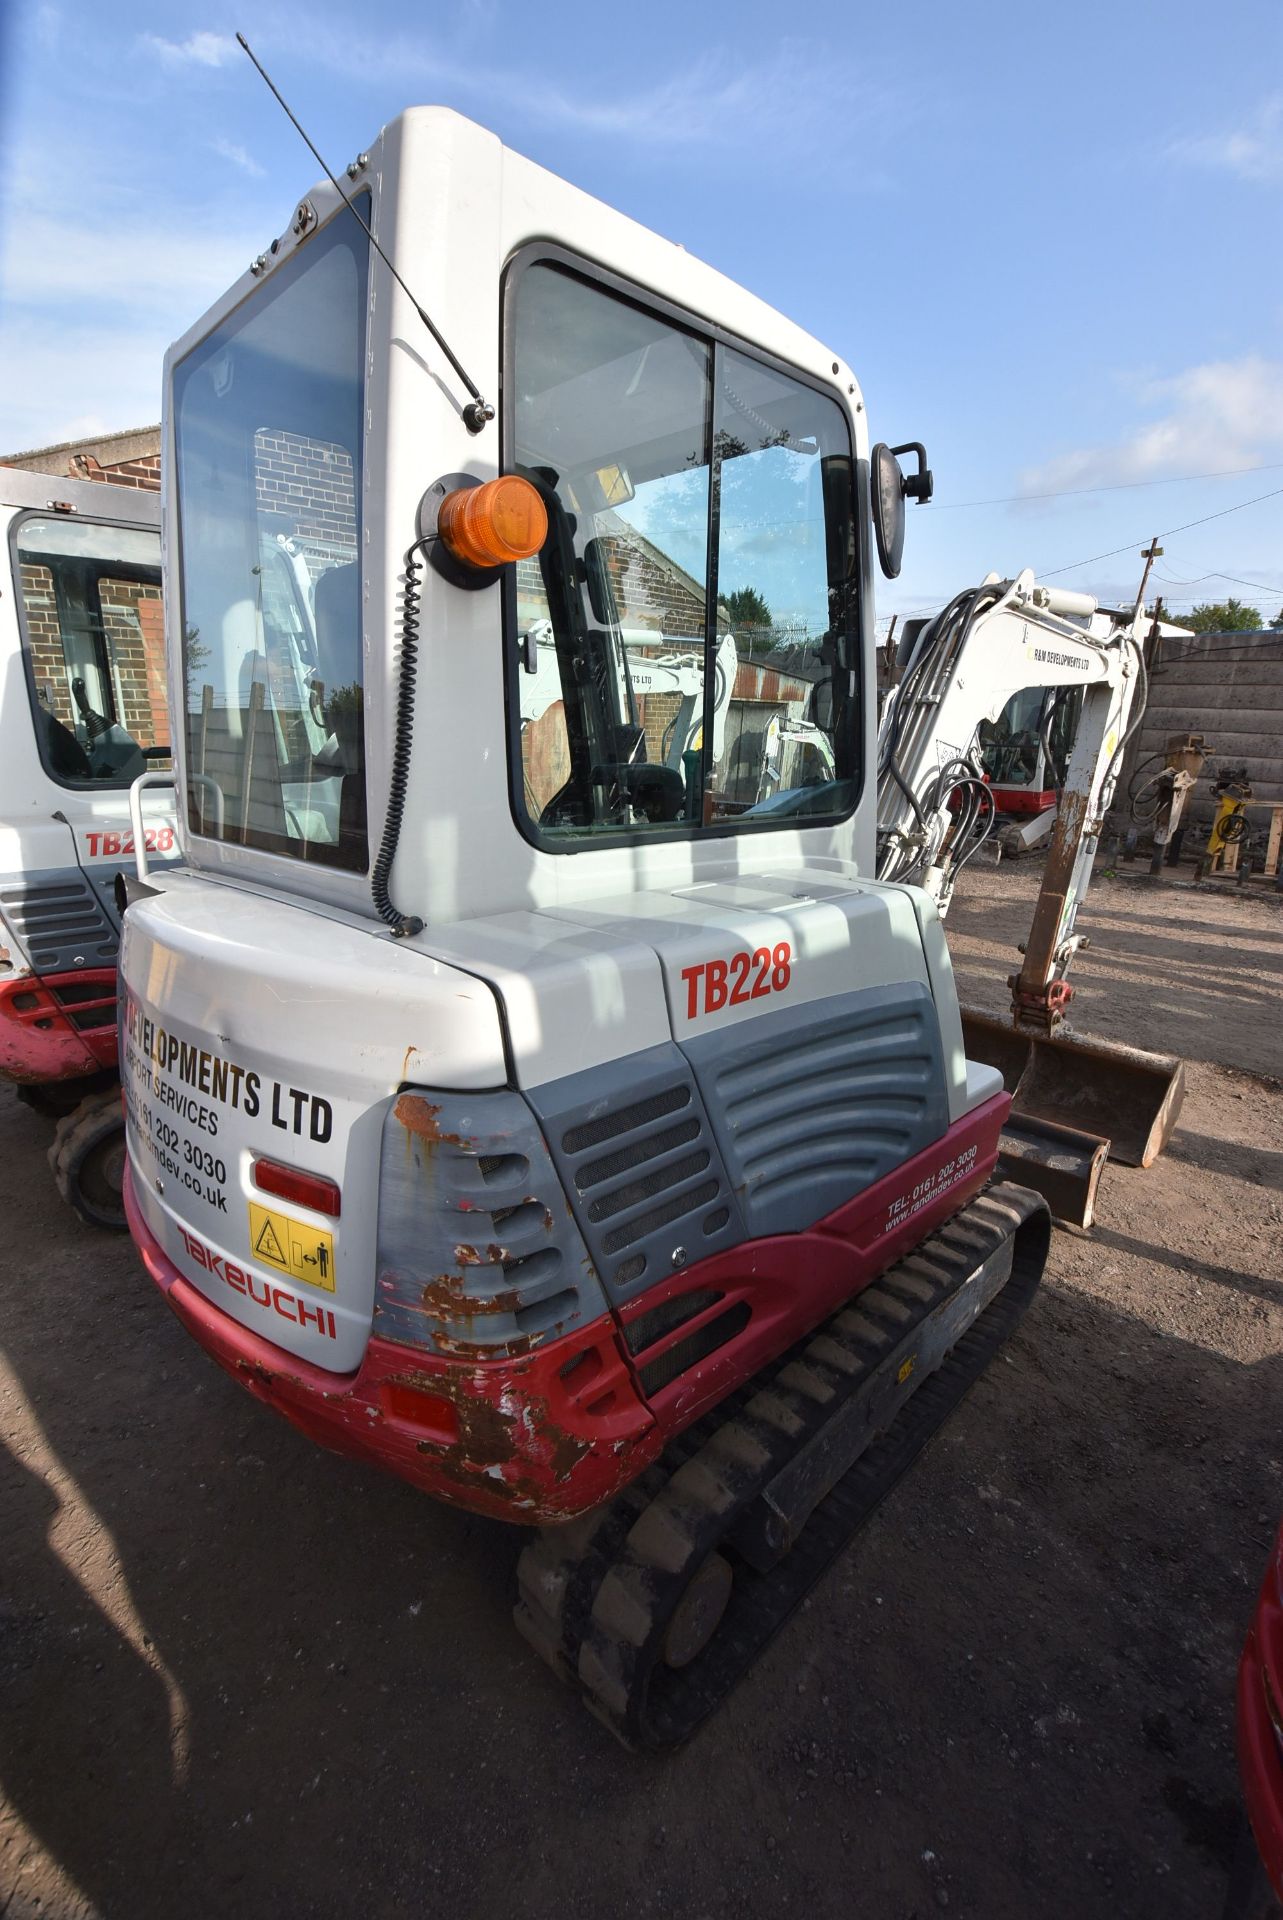 Takeuchi TB228 3T TRACKED EXCAVATOR, serial no. 122803241, year of manufacture 2014, 17.8kW engine - Image 3 of 8